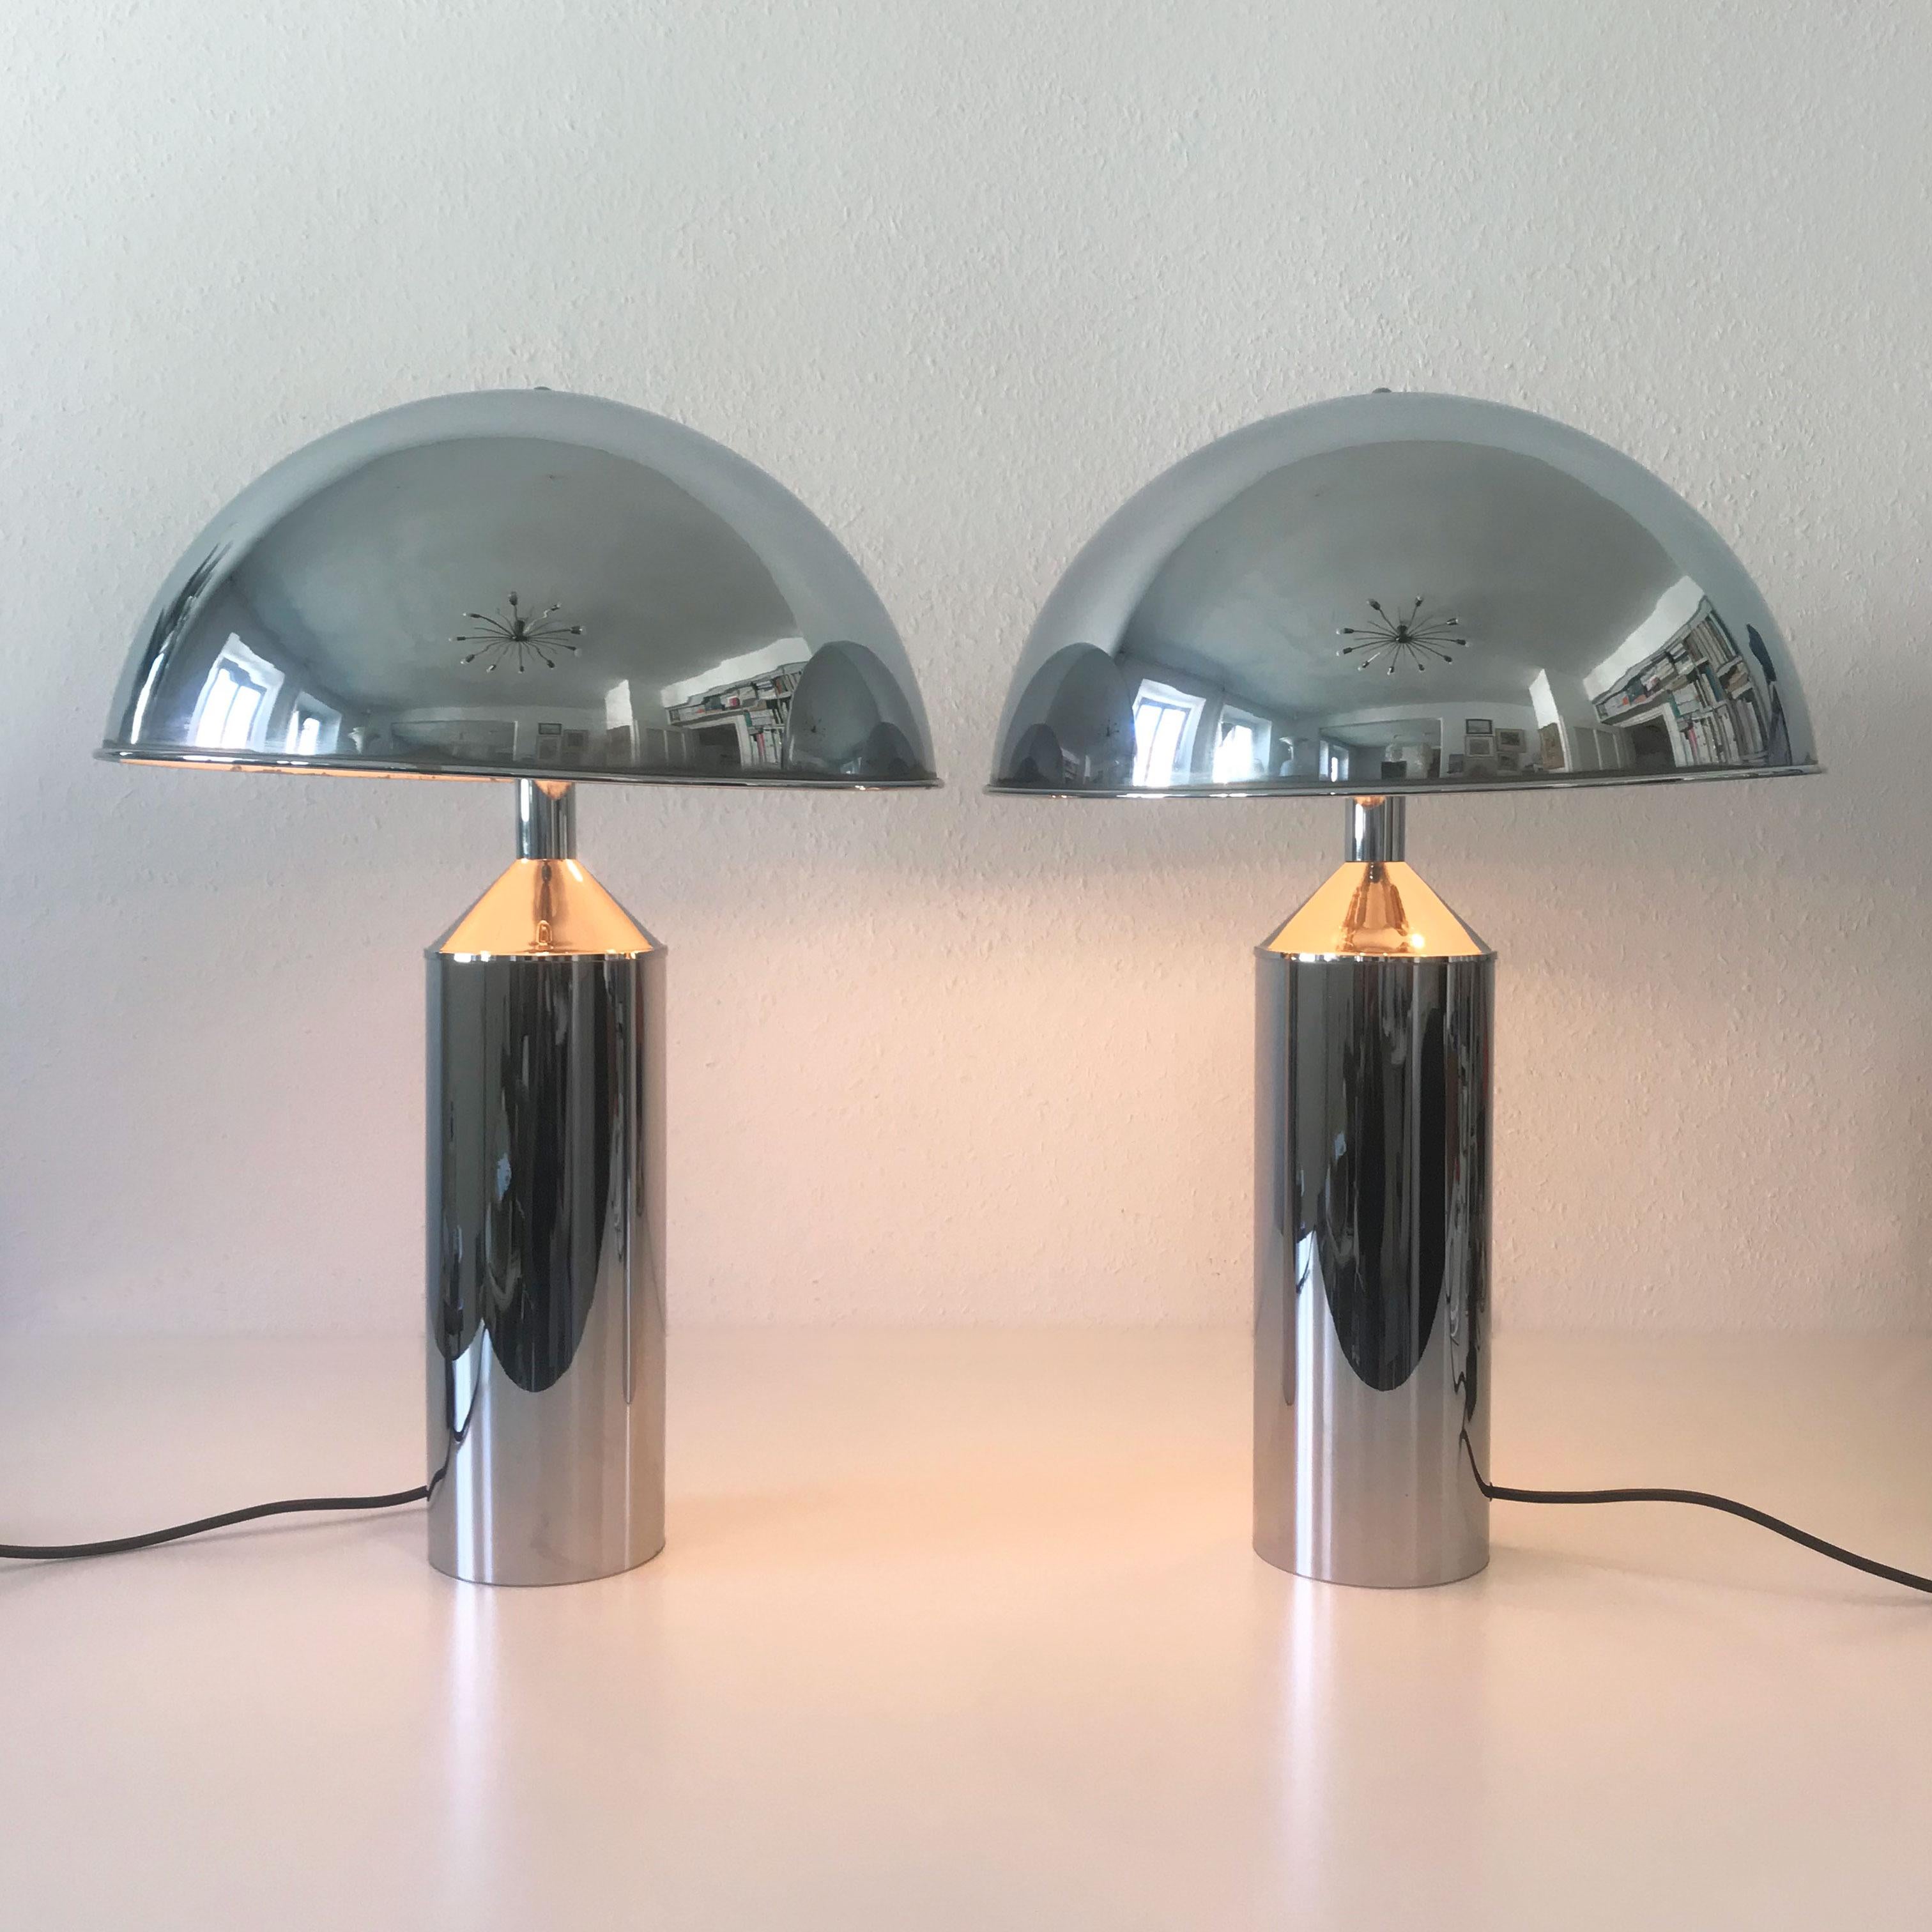 Pair of extremely rare, elegant and large Mid-Century Modern table lamps. Designed and manufactured by WKR Leuchten, Germany, 1970s.

These elegant table lamps are executed in chrome-plated metal. Each lamp is executed with 3 E27 screw fit bulb